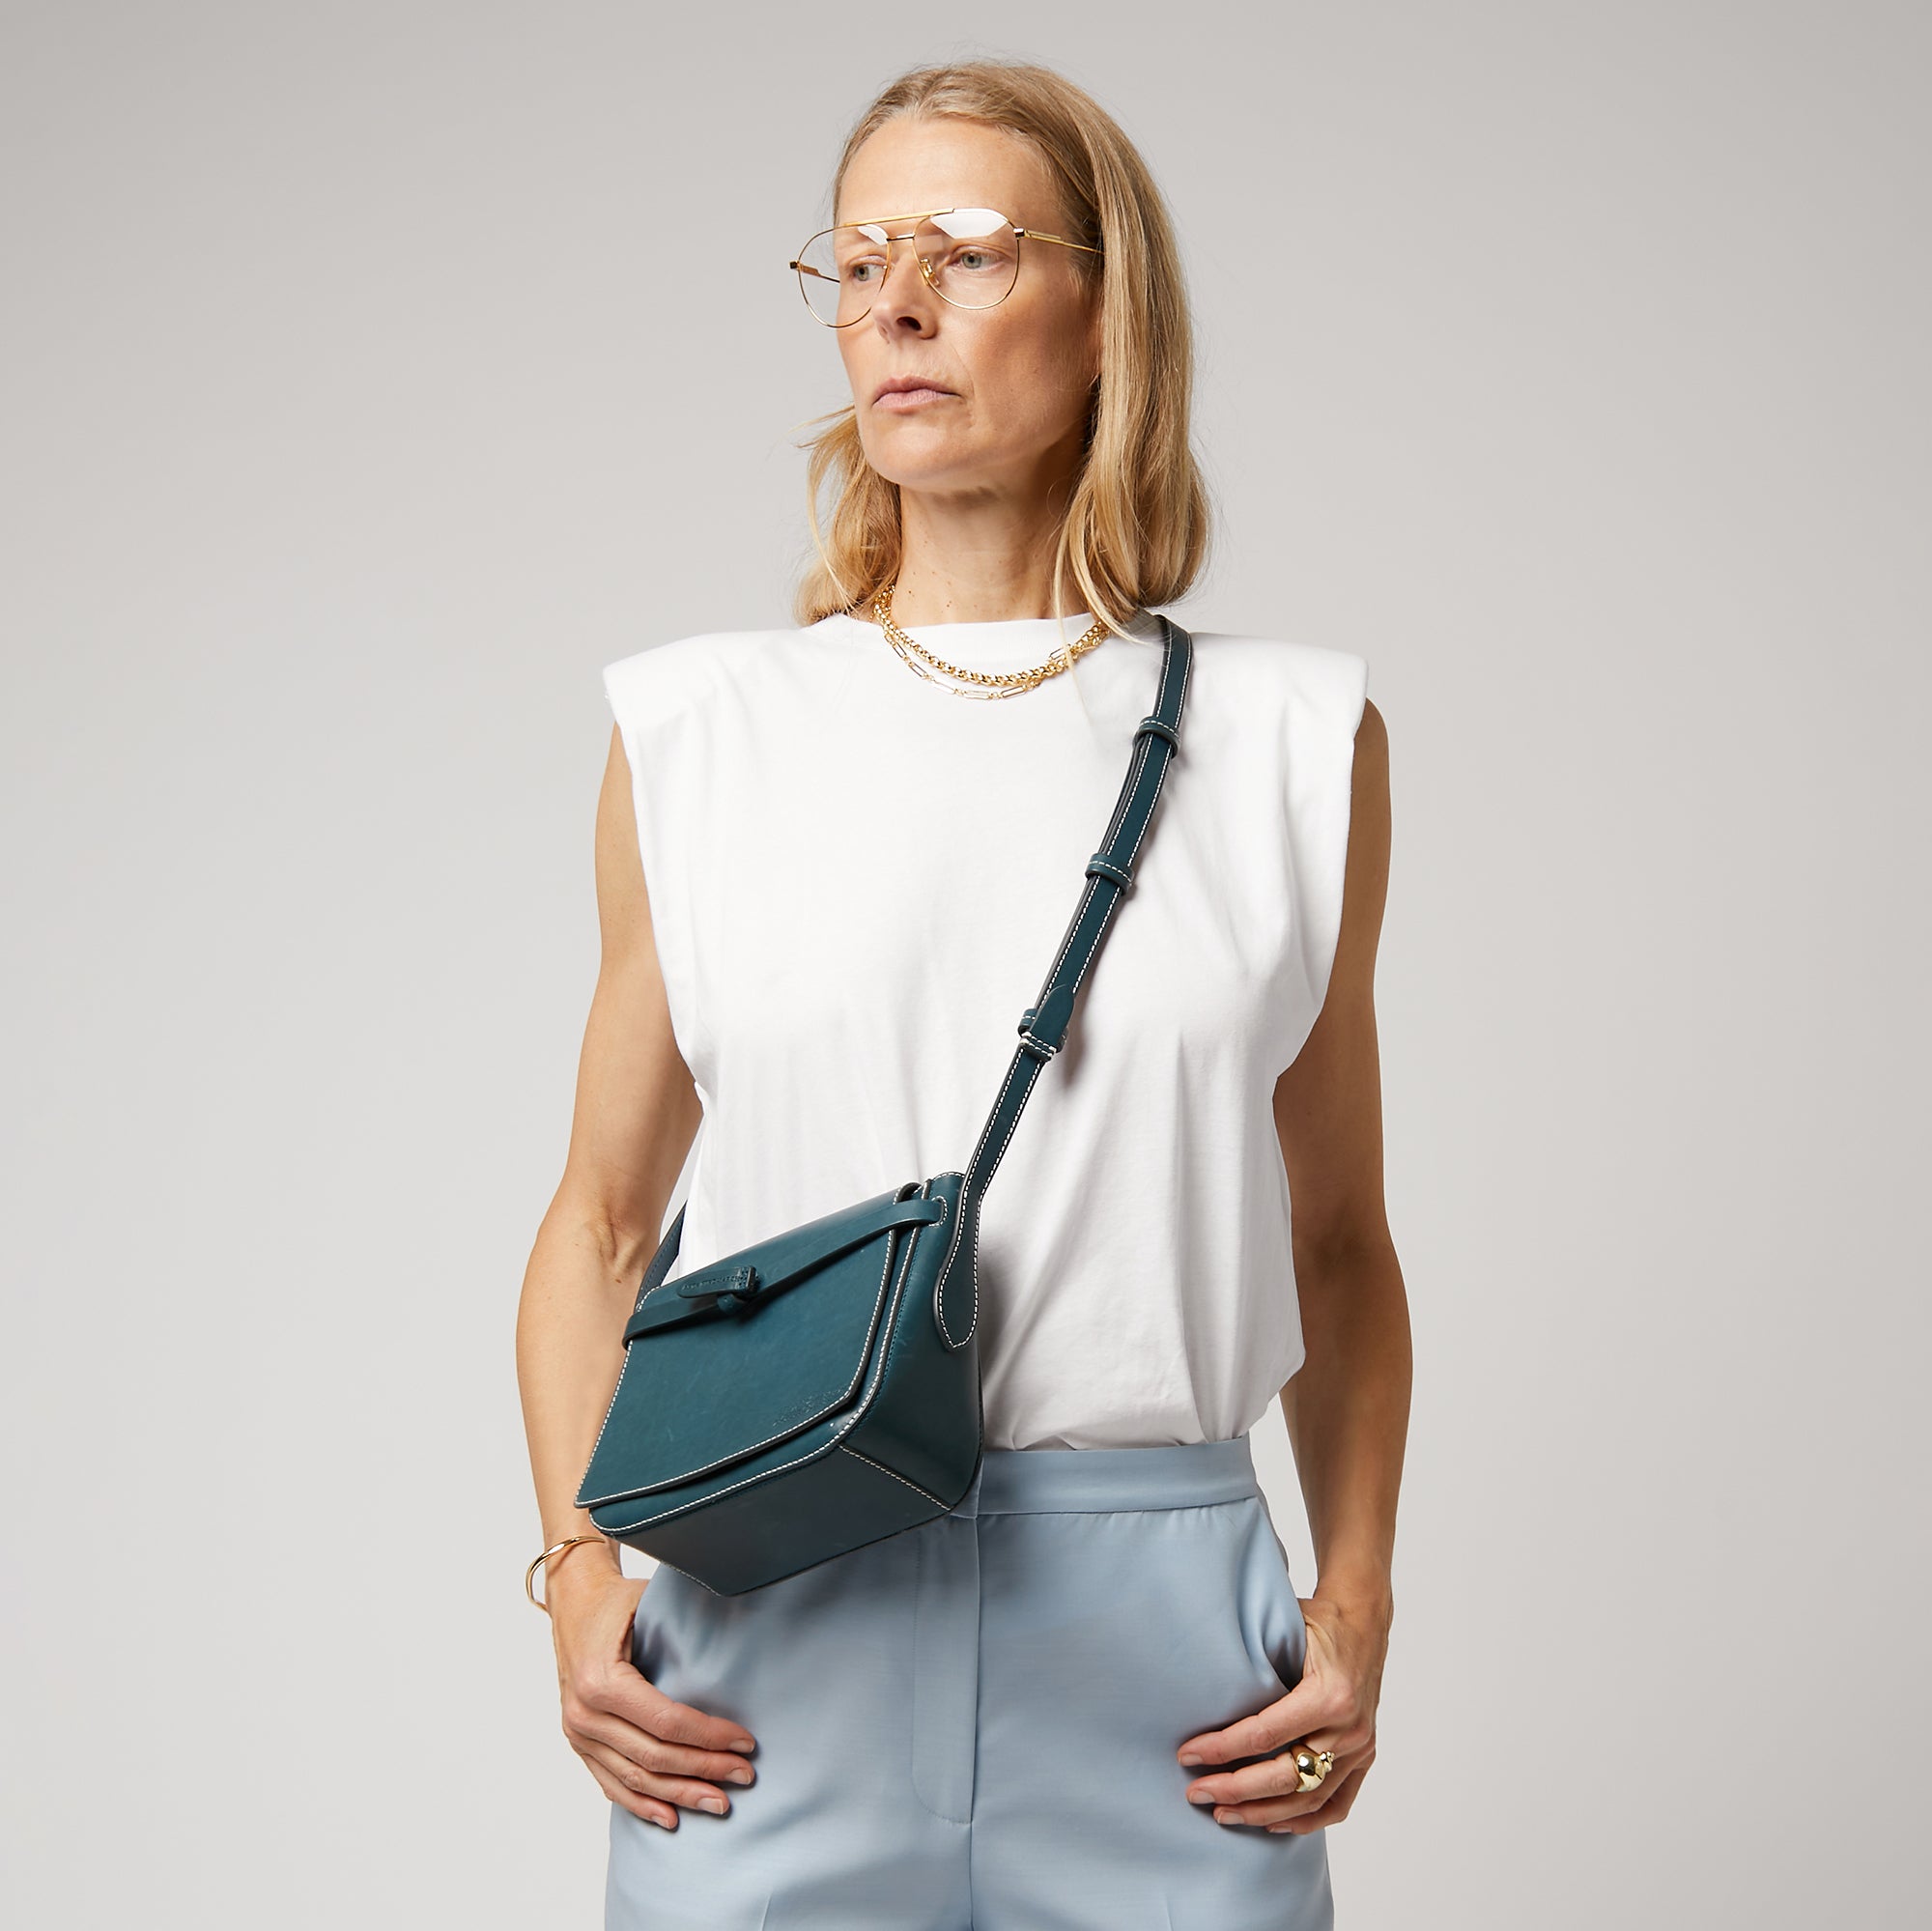 Return to Nature Cross-body -

                  
                    Compostable Leather in Dark Holly -
                  

                  Anya Hindmarch UK
